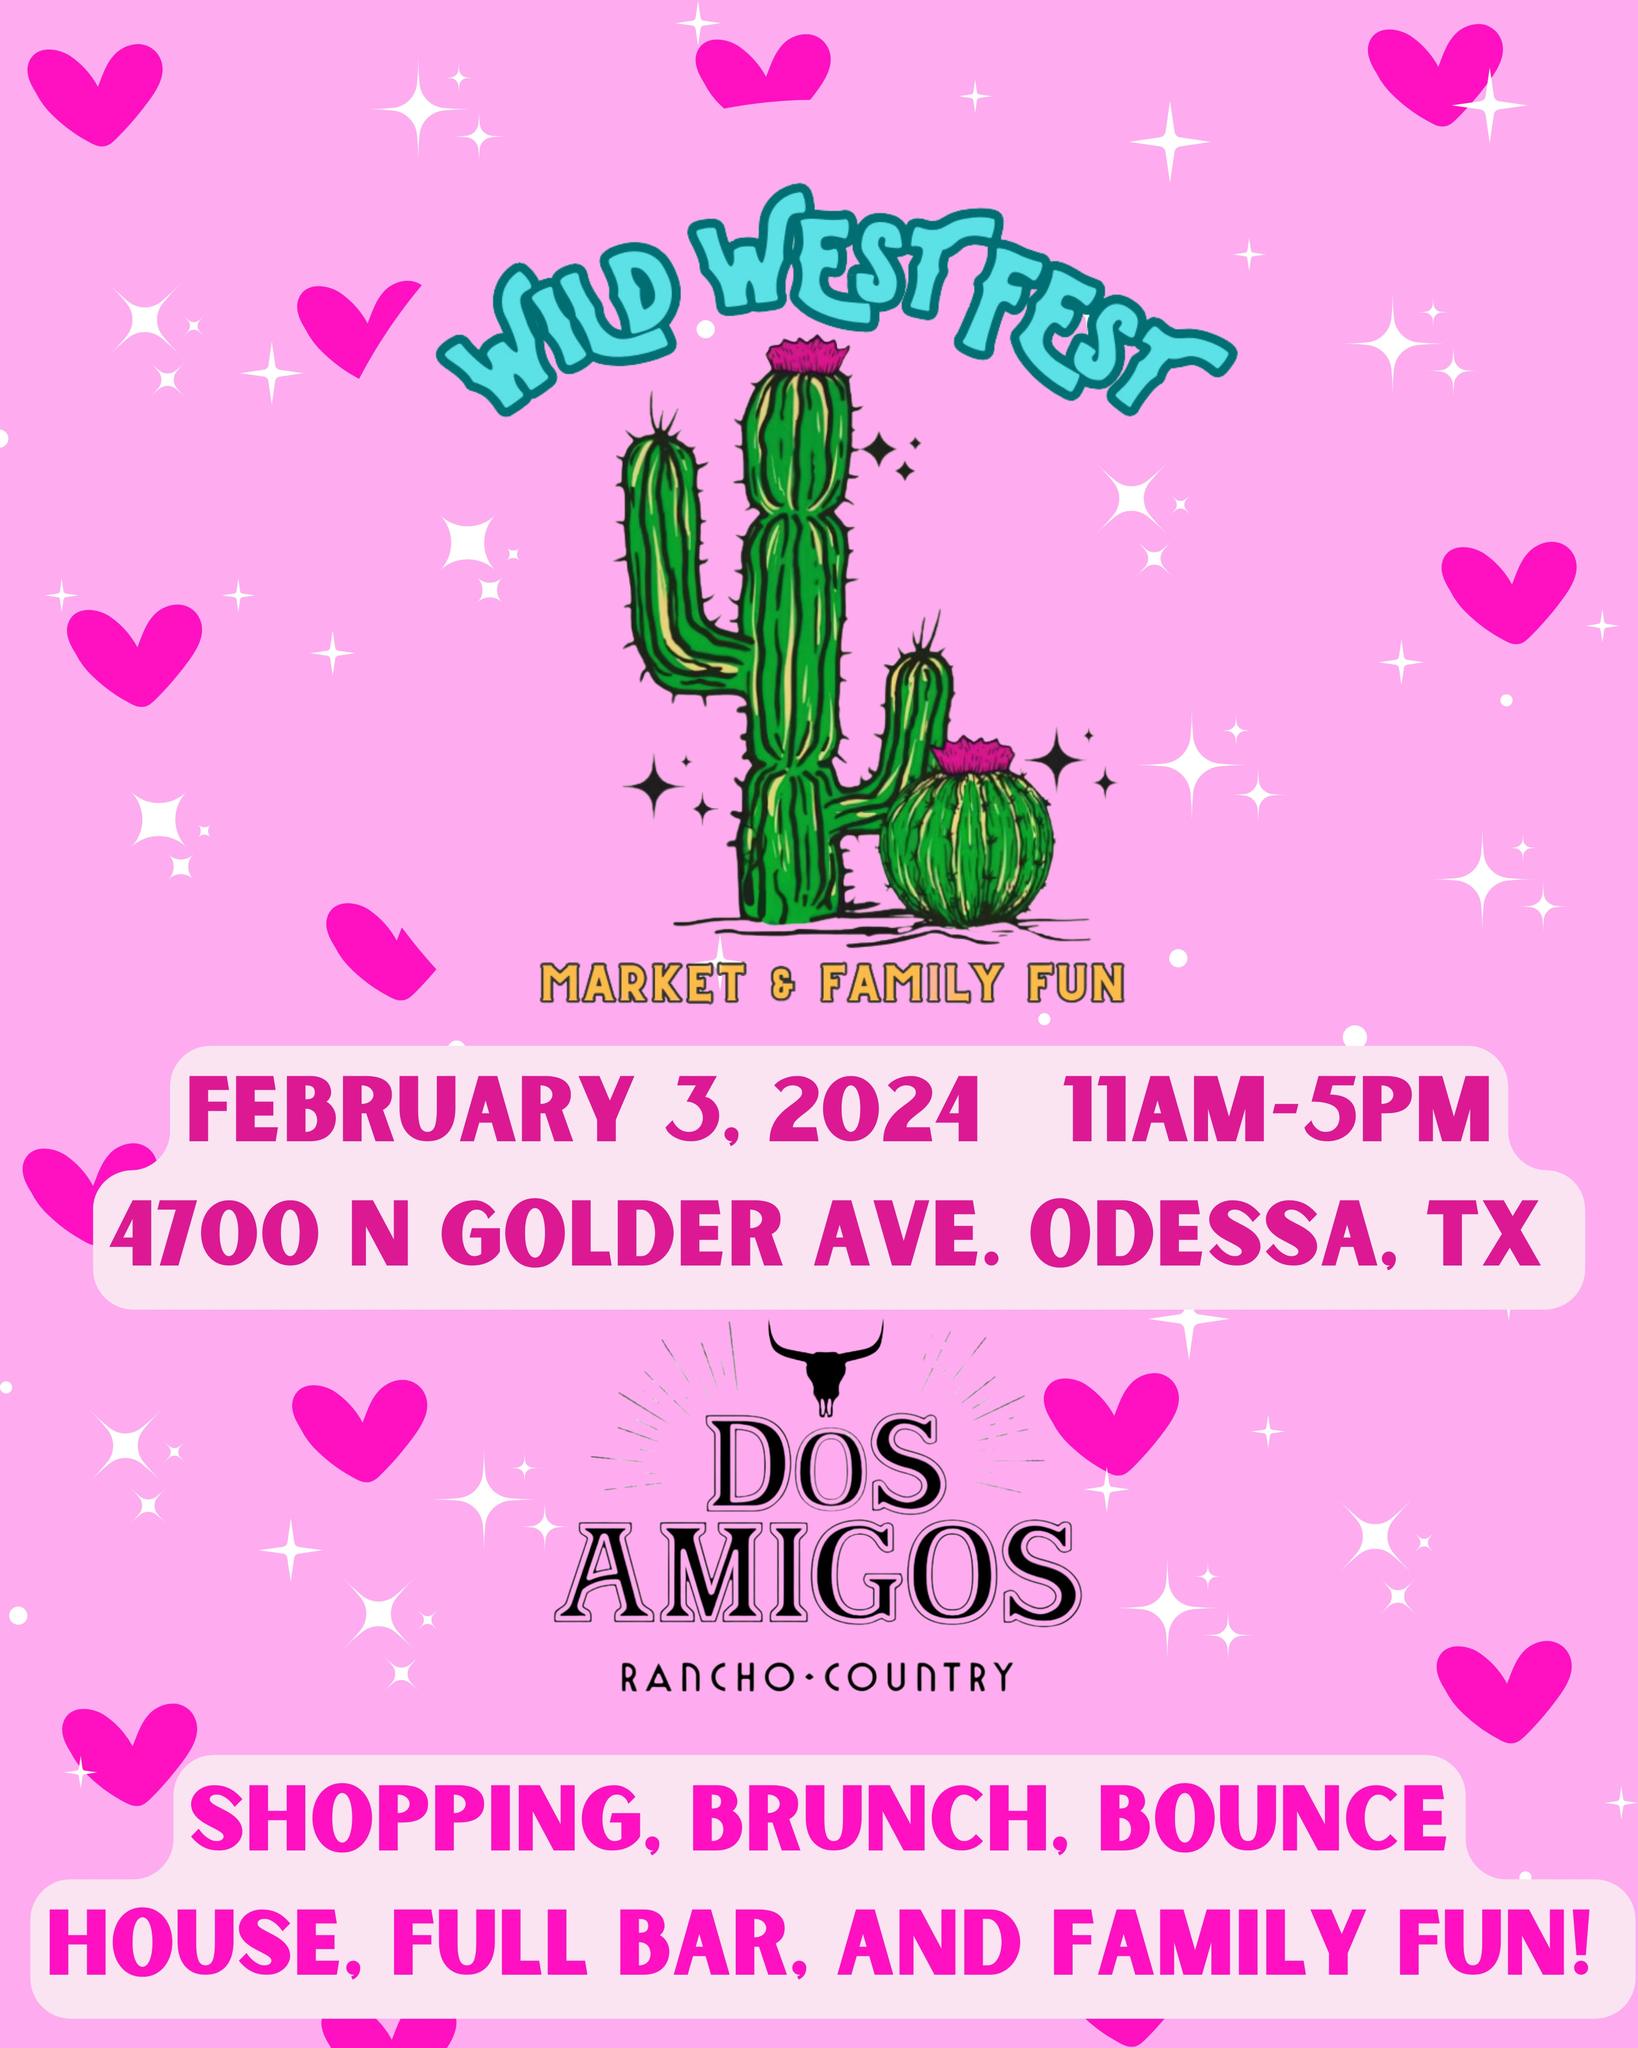 Wild West Fest at Dos Amigos on Saturday, February 3, 2024